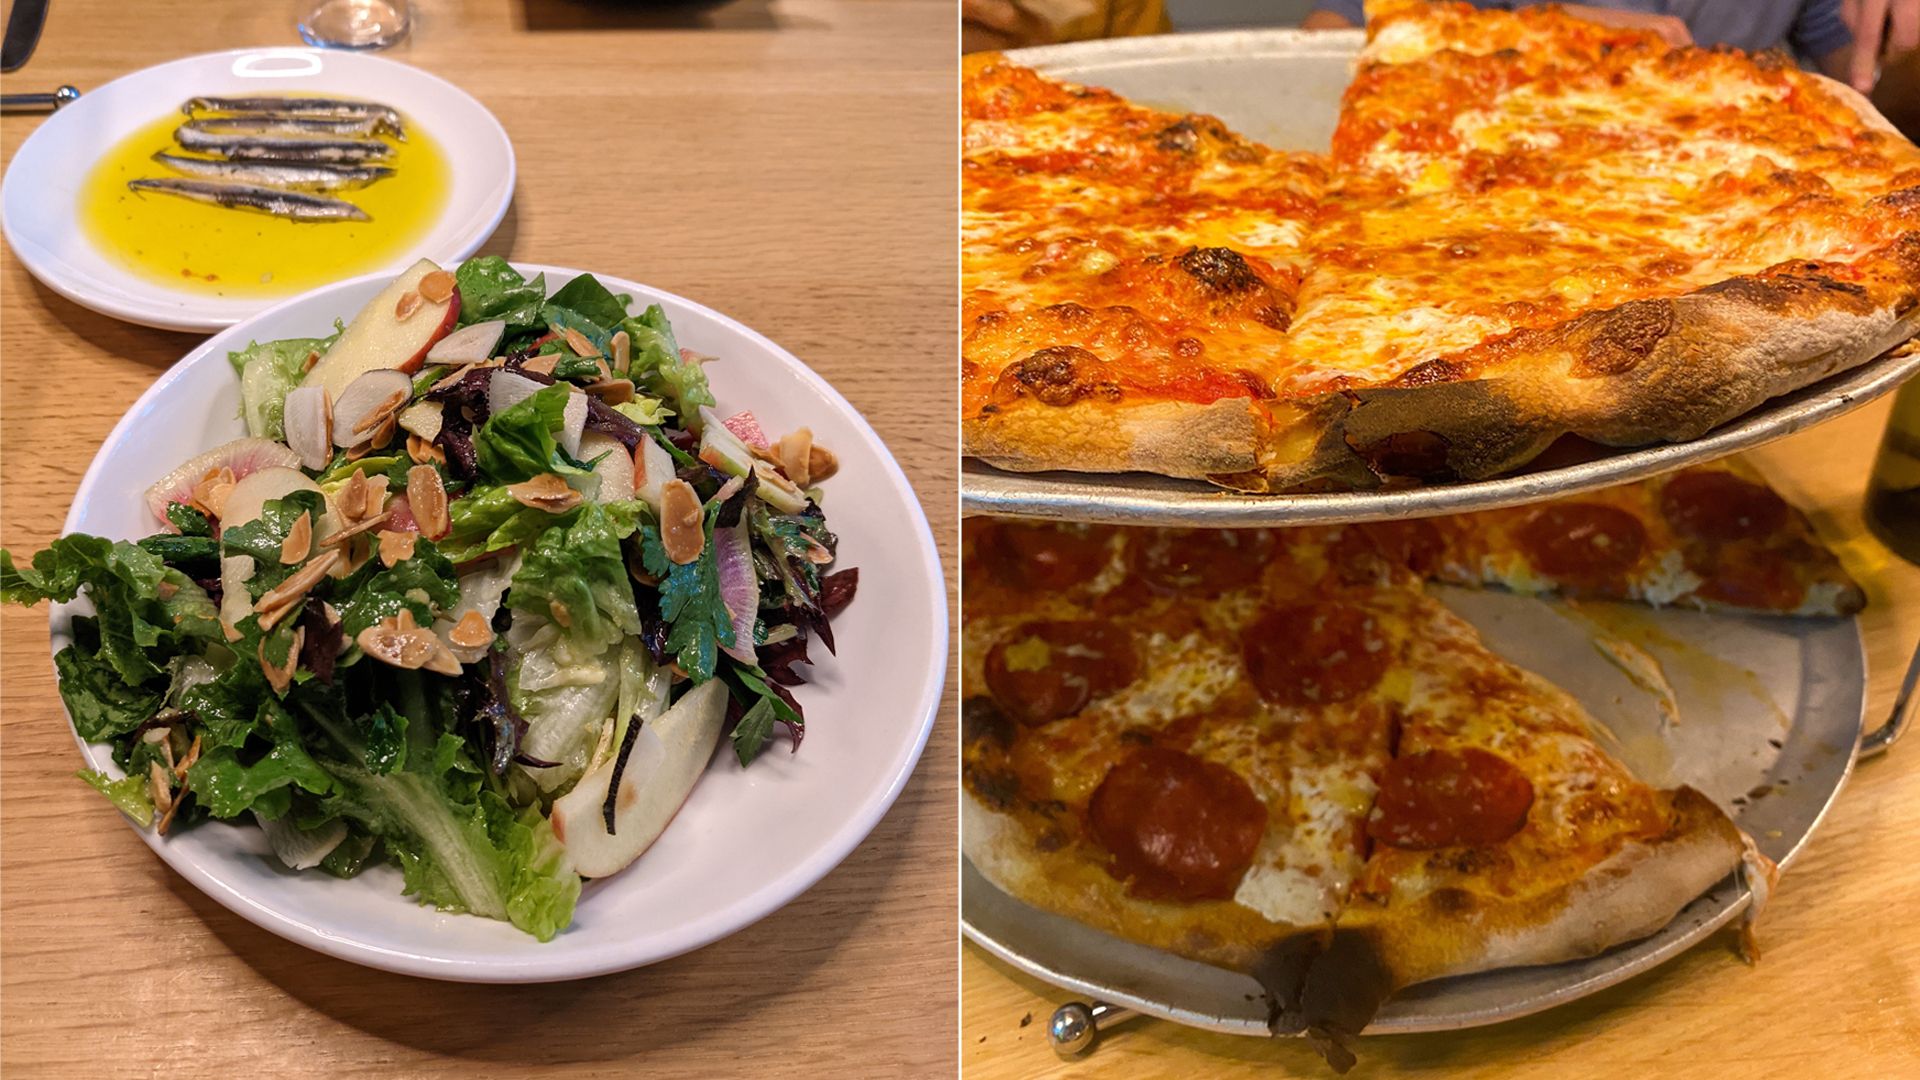 On the left, Cantabrian anchovies and a salad with fresh vegetigable; on the right, two pizza pies from Pizzeria Beddia in Fishtown.